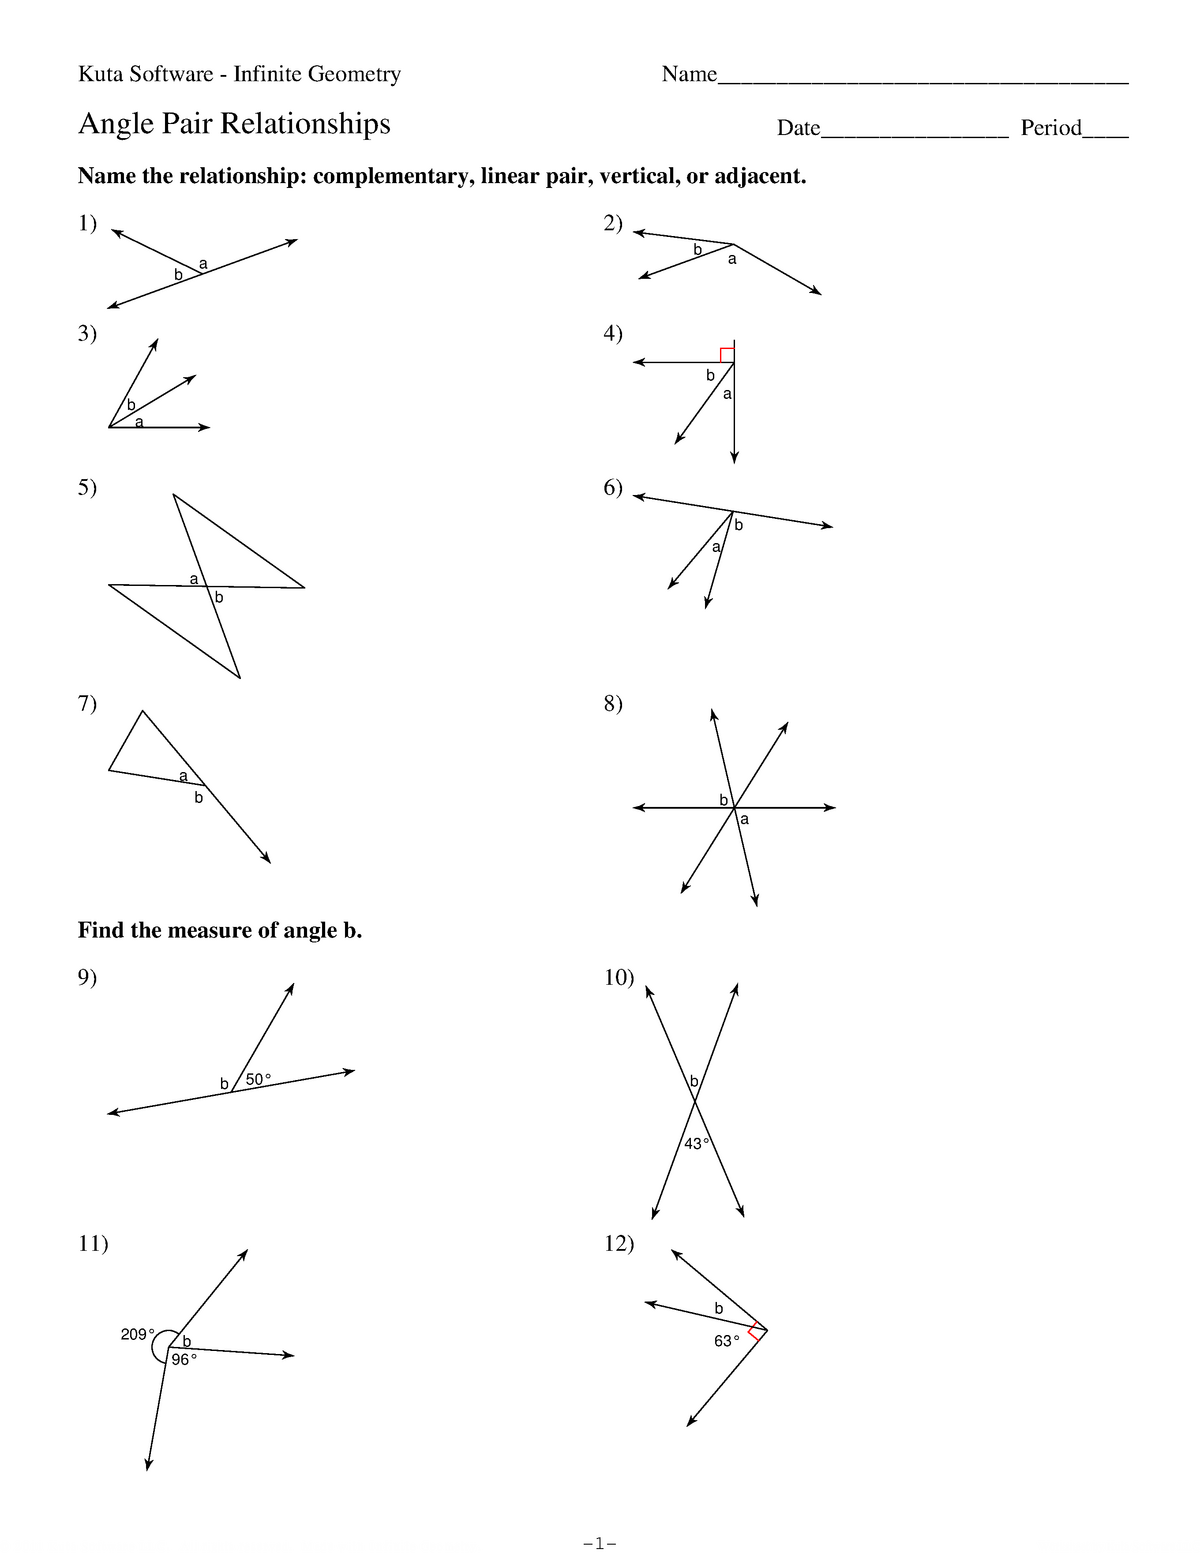 10-Angle Pair Relationships - Bsed Math - MAT - StuDocu Pertaining To Angle Pair Relationships Worksheet